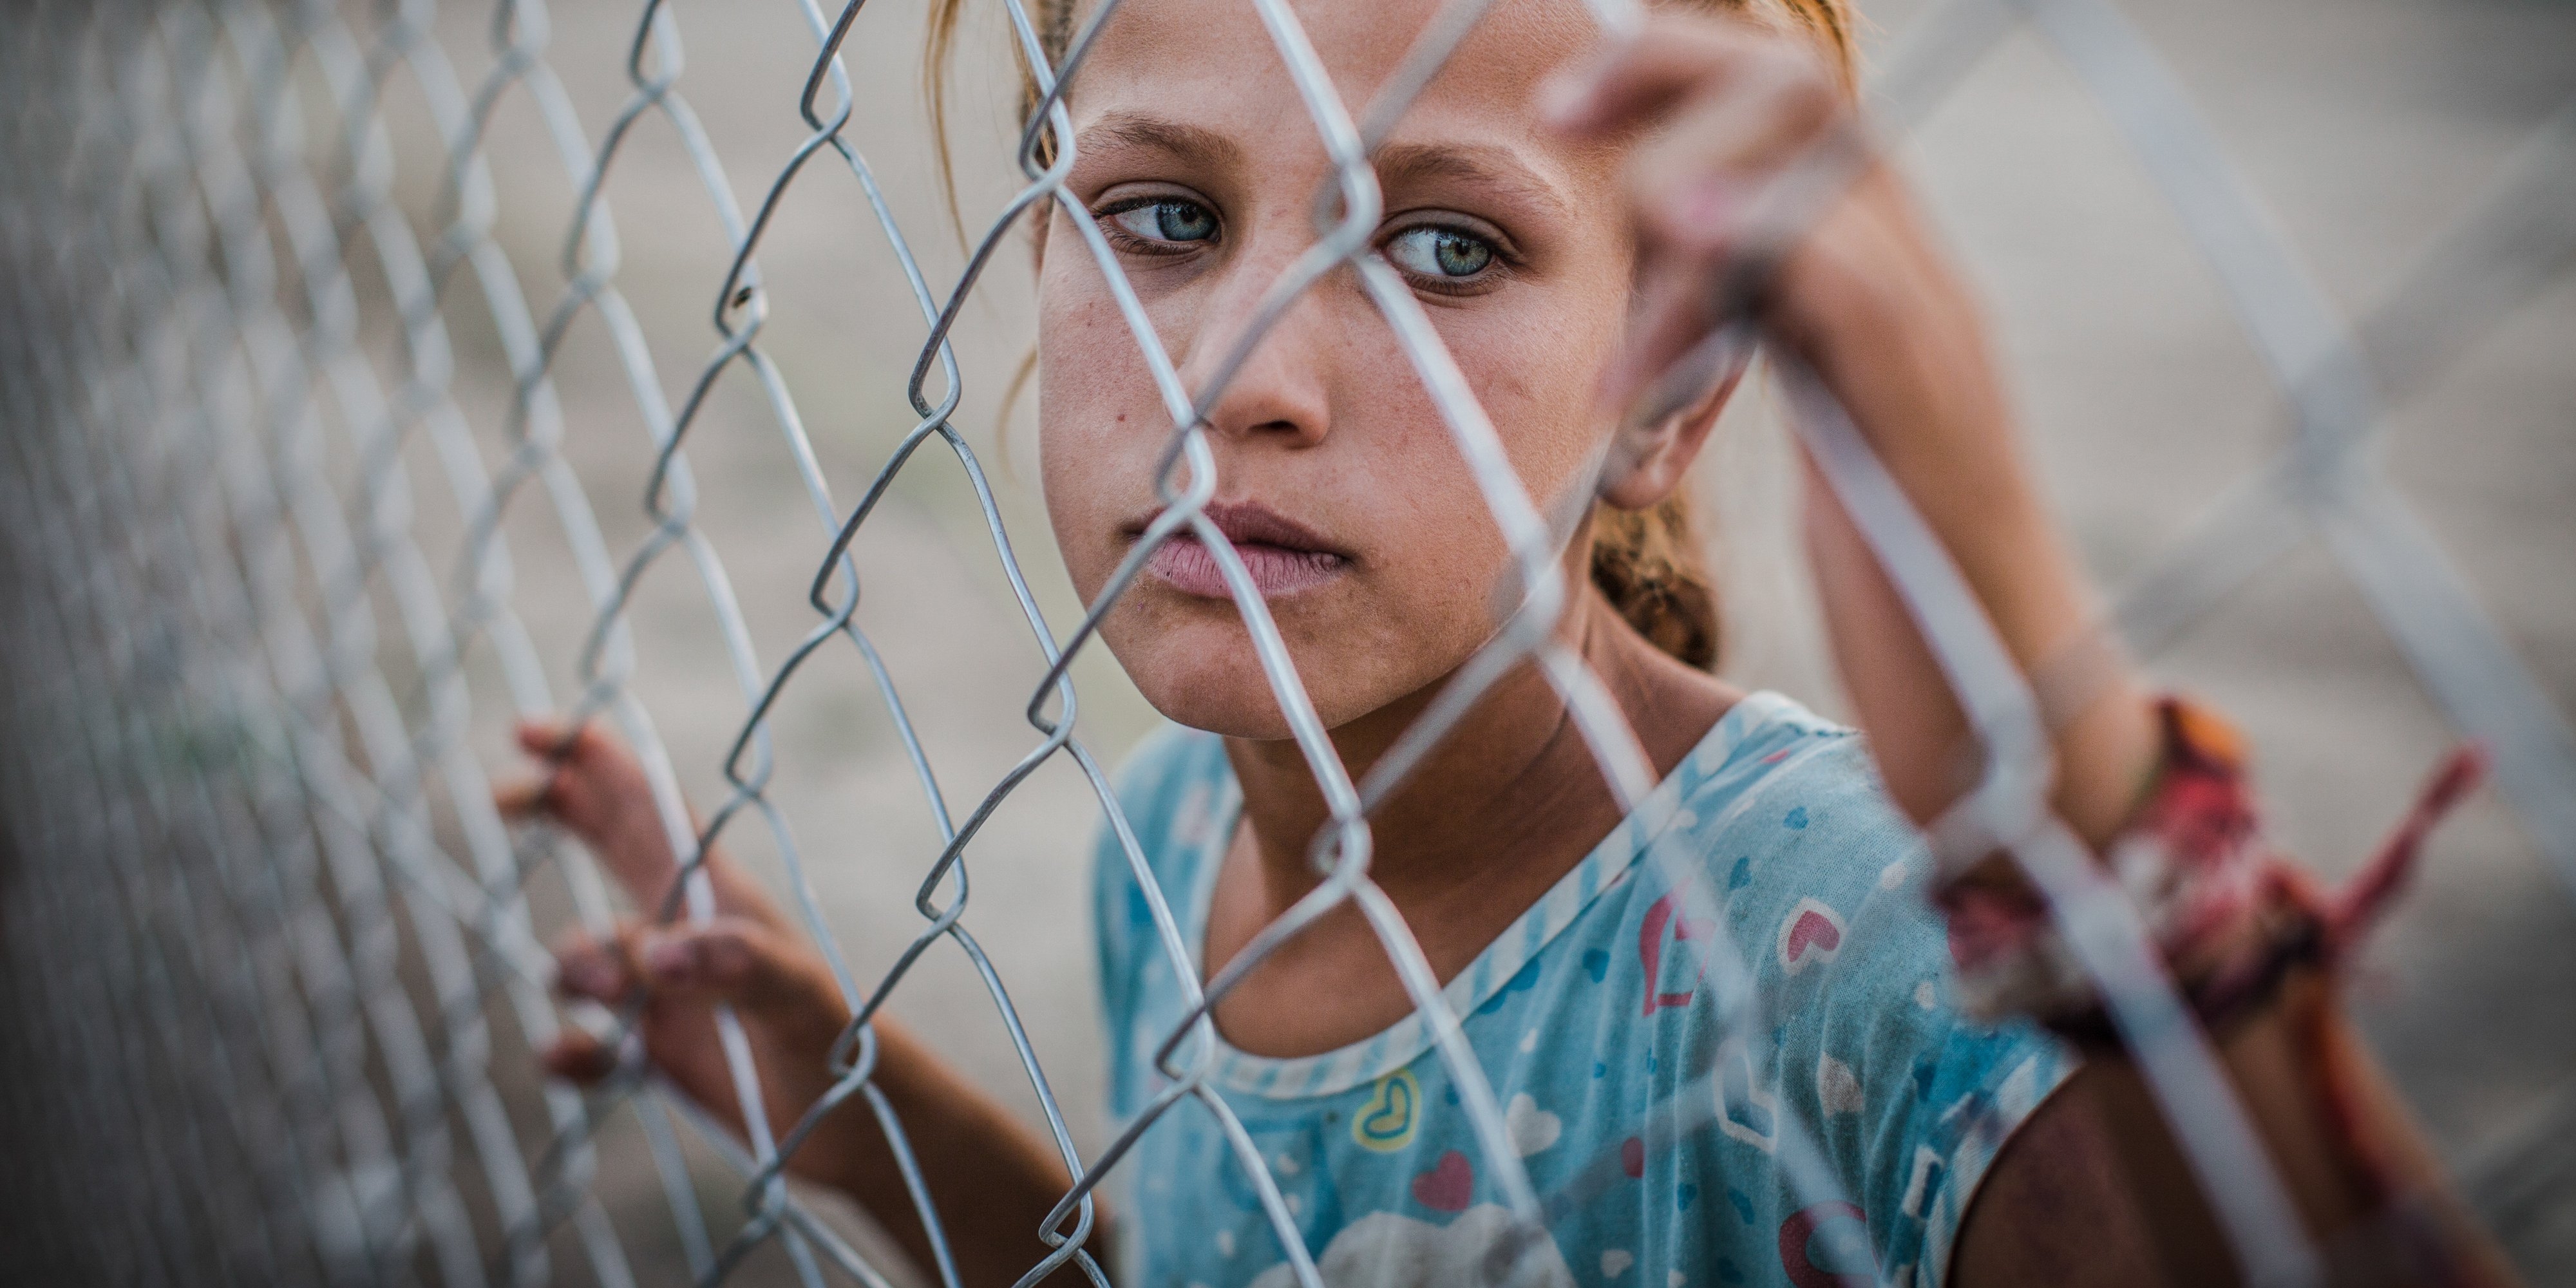 A young girl stands behind a fence at a refugee camp. She and her family are among the 3.1 displaced people in Iraq. Due to armed conflict the family of eight, were forced to leave their home and flee. Photo Credit: CJ Clarke/Save the Children 2015.